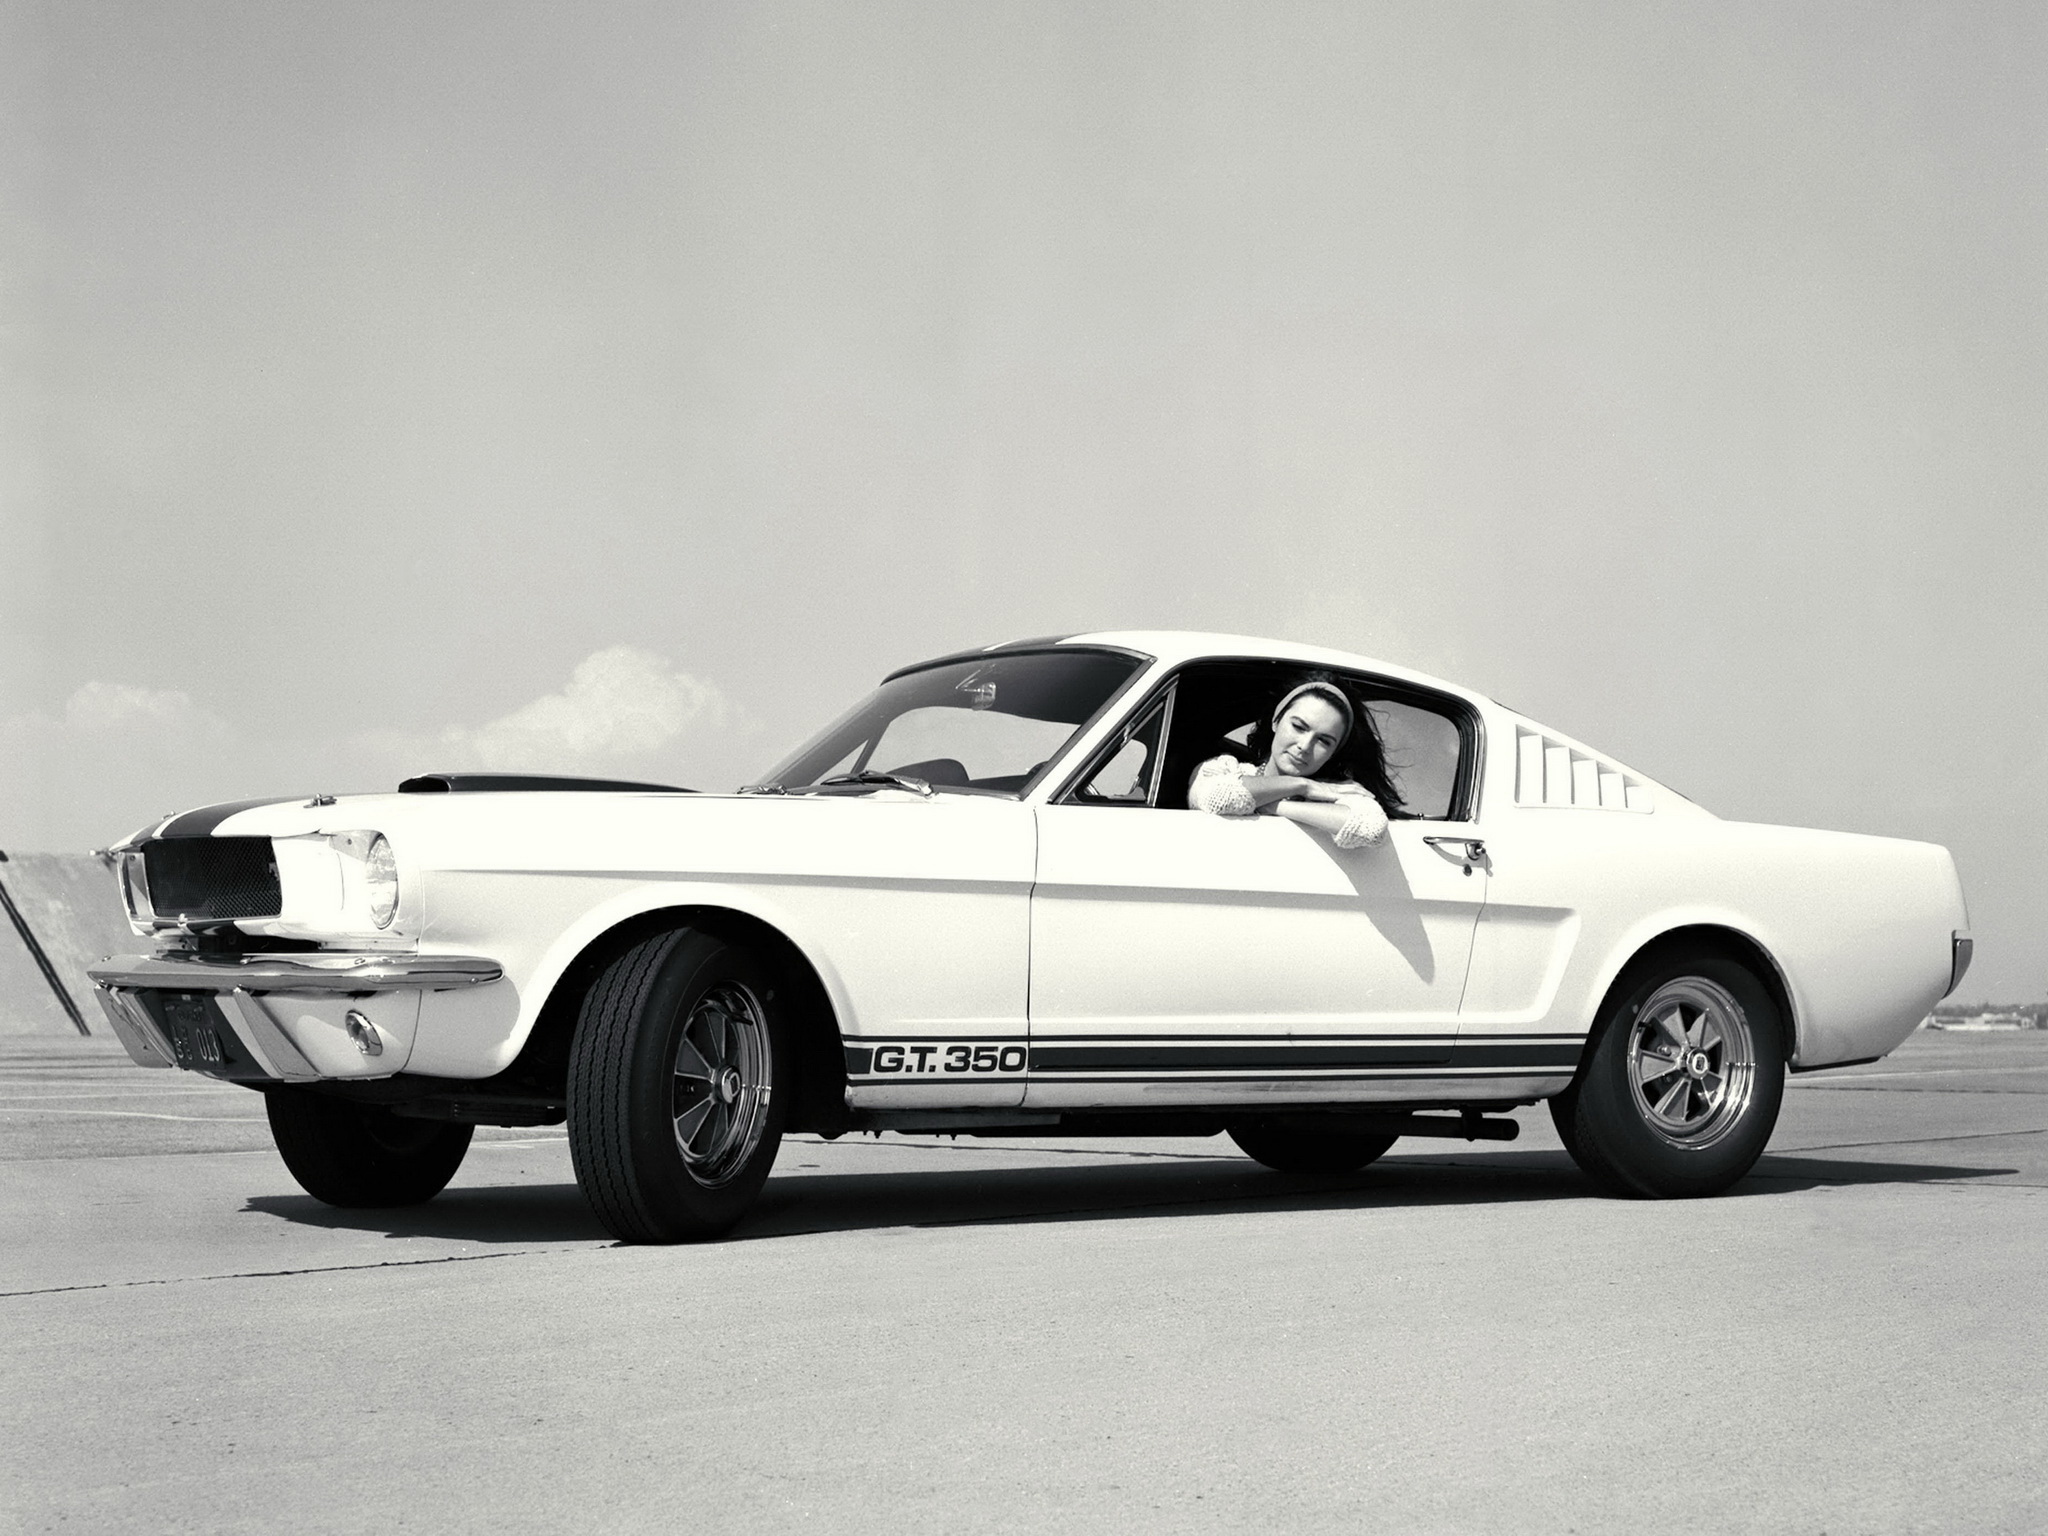 1965, Shelby, Gt350, Ford, Mustang, Classic, Muscle, B w Wallpaper